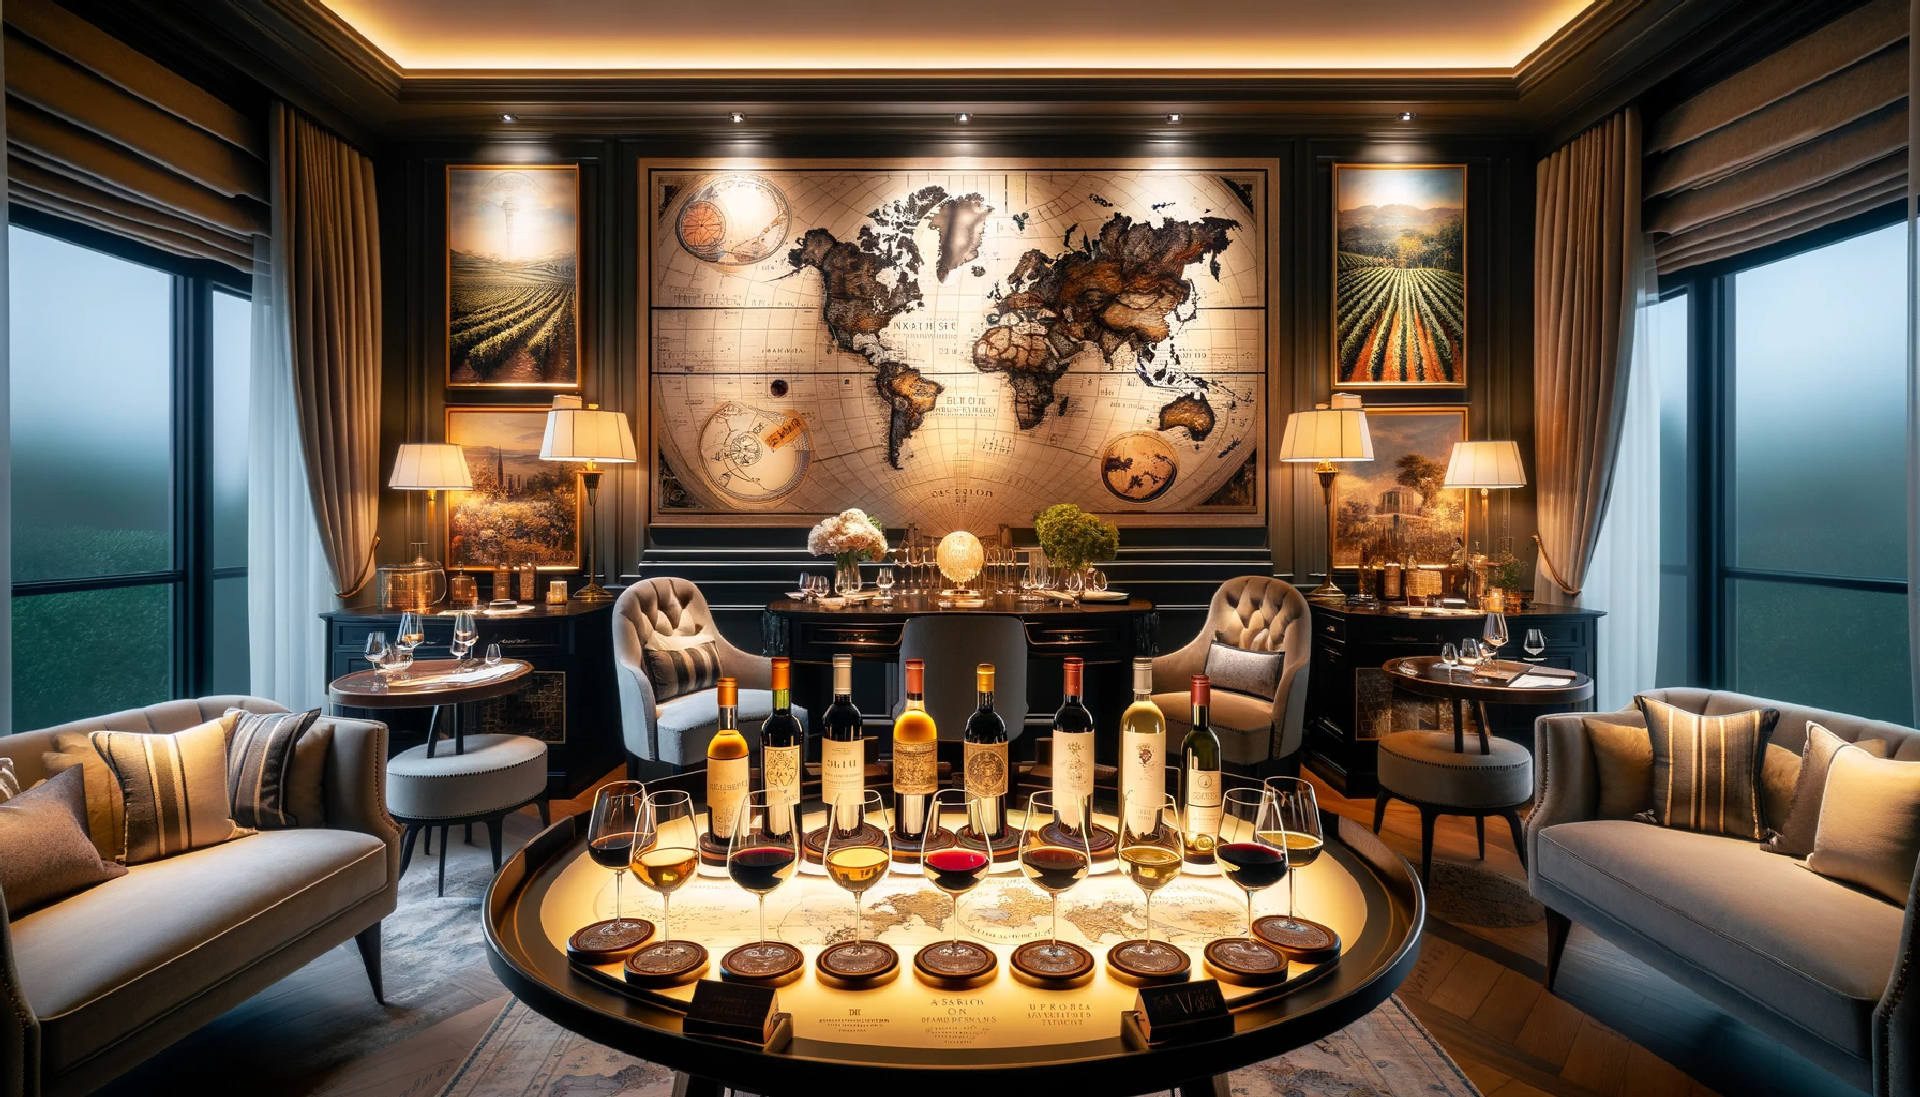 image depicts an elegantly arranged living room set for a wine tasting experience. The focal point is a table adorned with an array of mini wine bottles, each uniquely labeled to represent various global regions and grape varieties. In the background, a large, detailed world map adorns the wall, symbolizing a worldwide wine journey. The room is tastefully decorated with vineyard-inspired decor, paying homage to renowned wine regions. The overall ambiance is warm and inviting, highlighted by cozy lighting that accentuates the rich colors of the wines. The atmosphere is intimate and sophisticated, perfect for exploring the diverse flavors and aromas of the curated wine flights. The room is devoid of people, emphasizing the focus on the wine tasting setup and its elegant, travel-inspired theme.